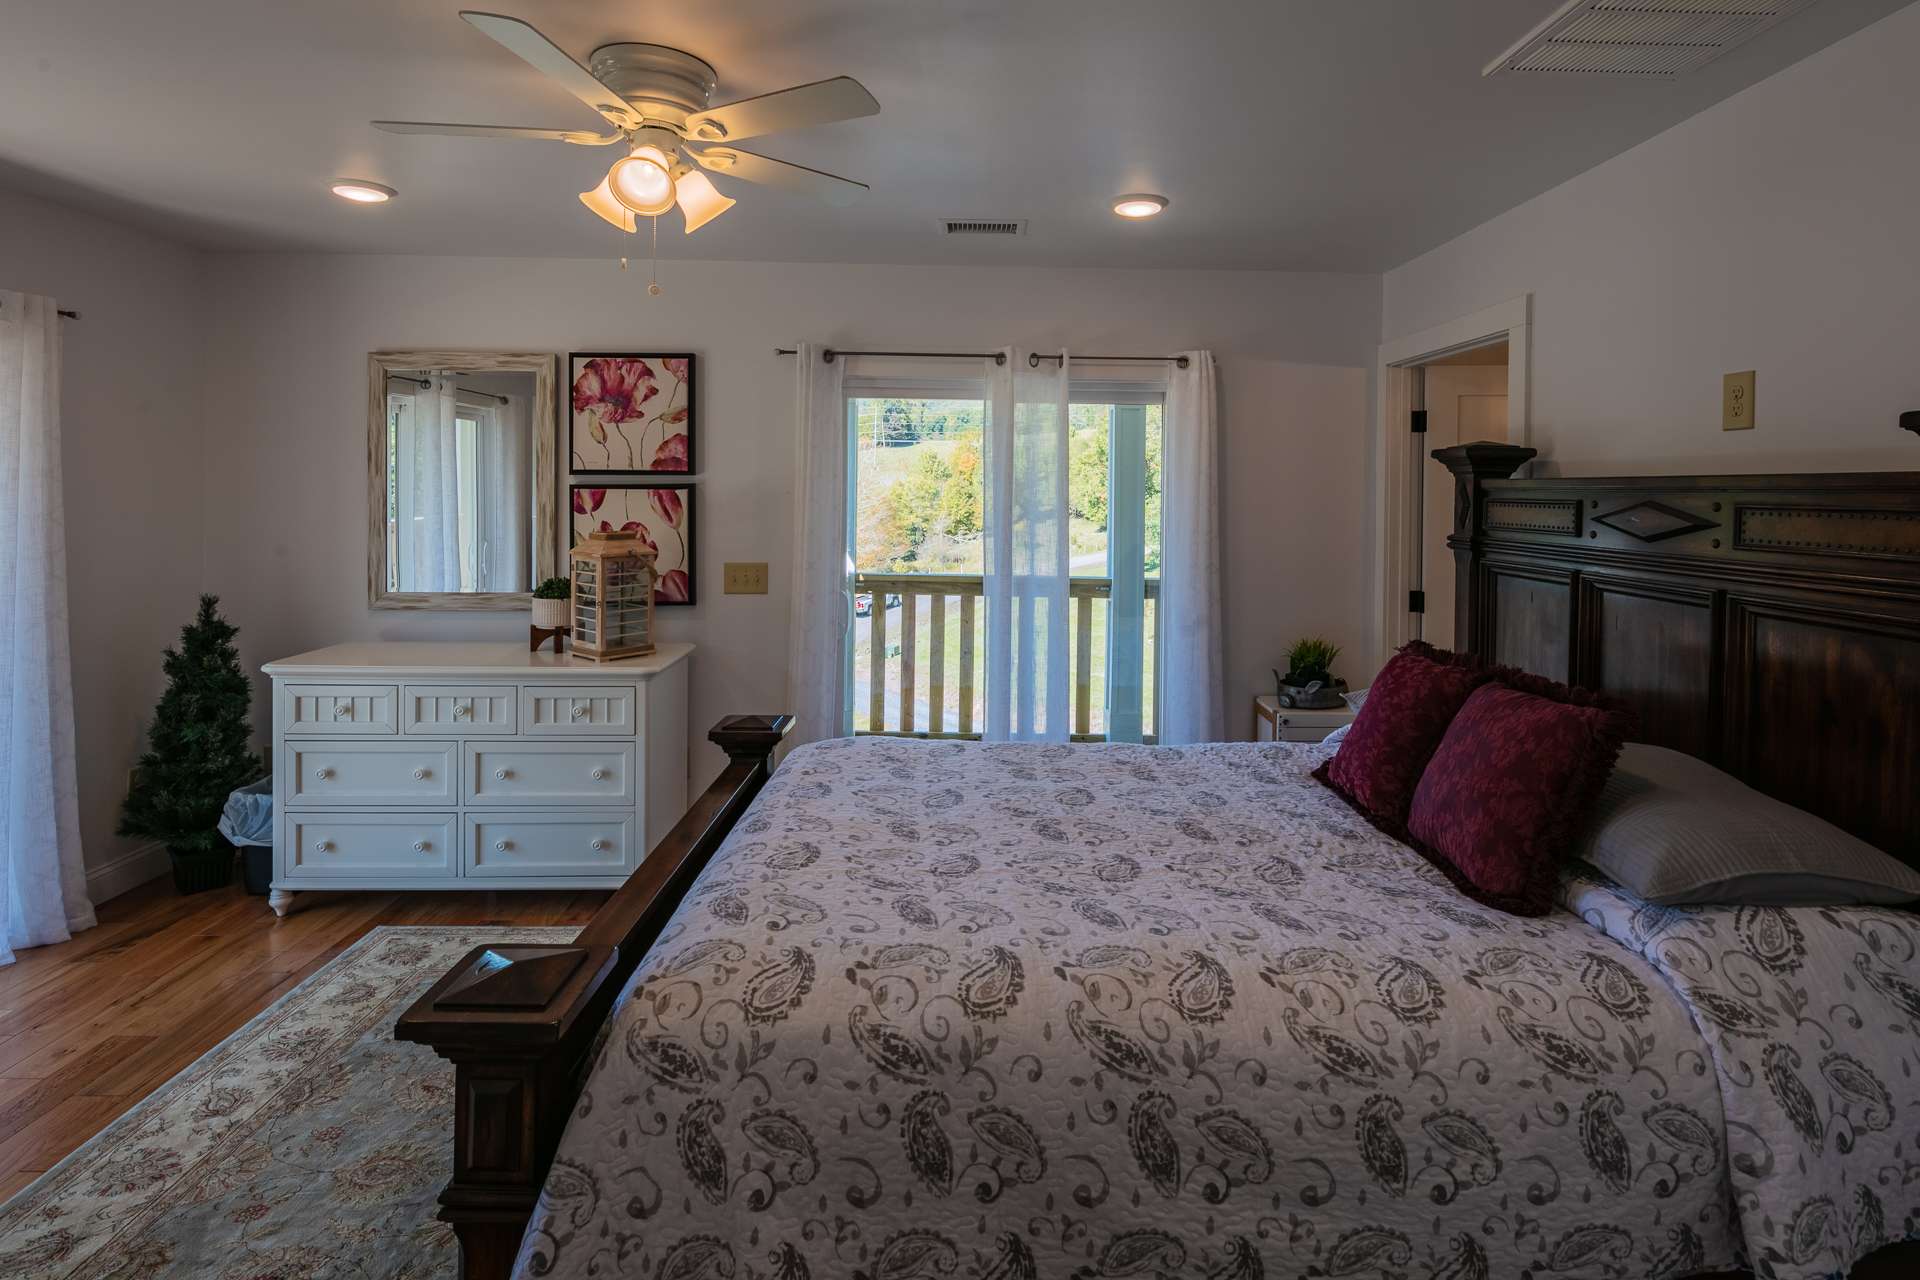 The upper level features two guest bedrooms, each with their own walk-in closet,  private bath and deck.